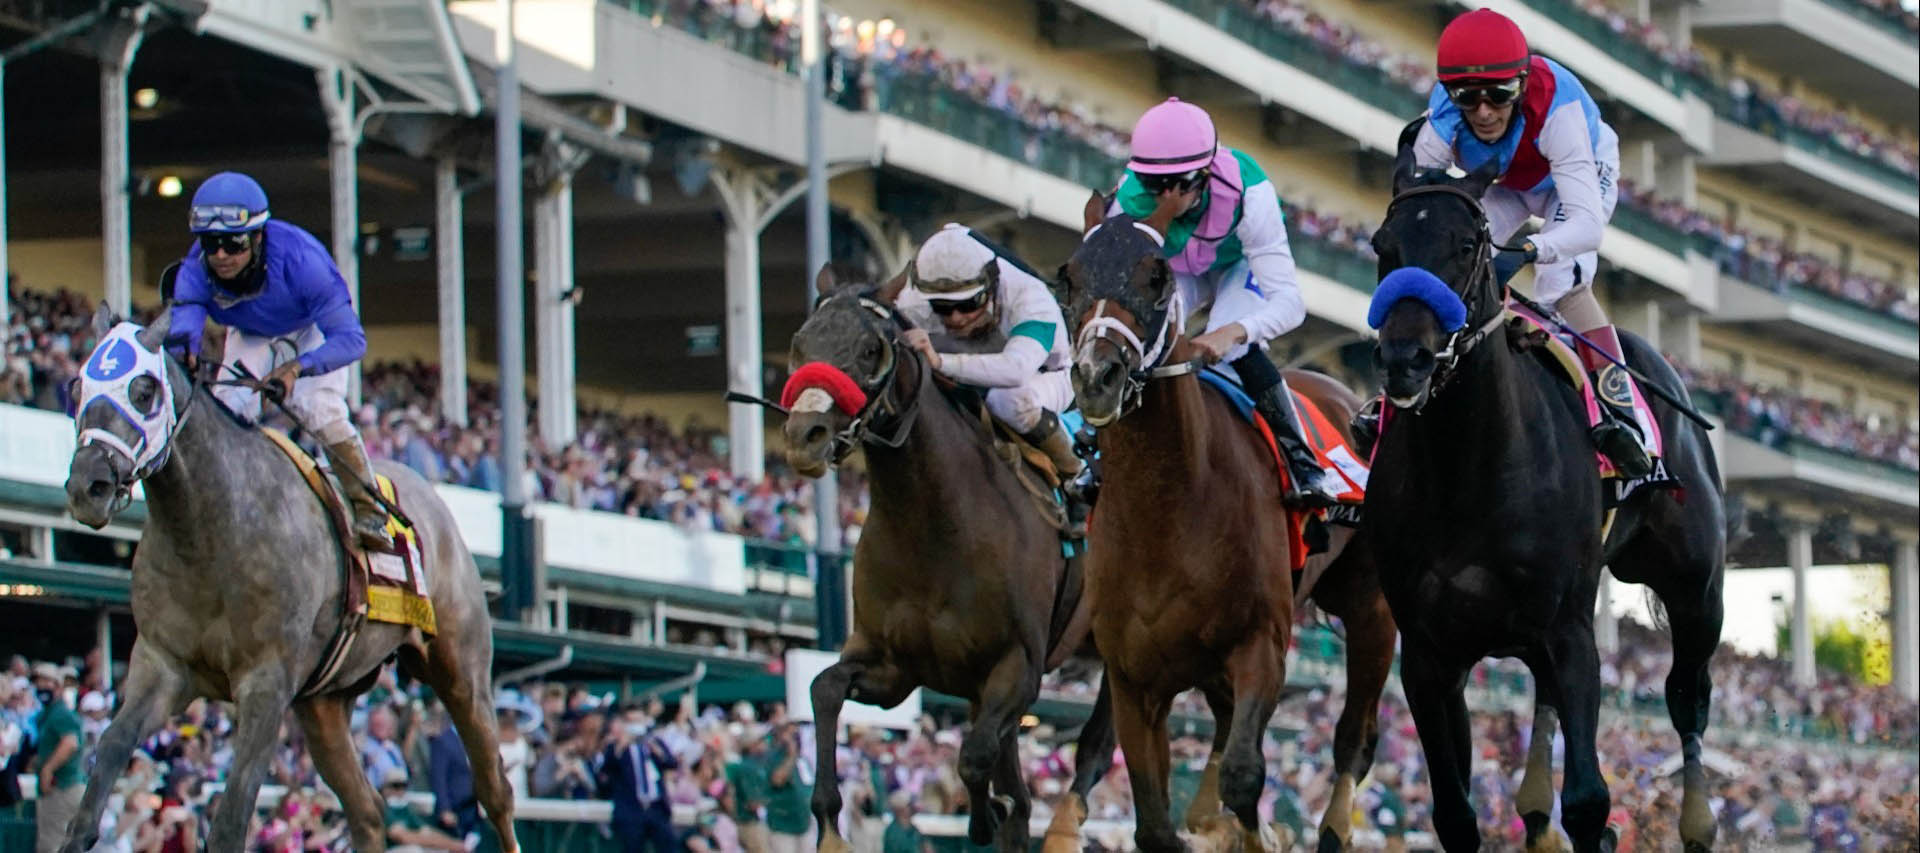 2022 Kentucky Derby Betting Tips to Make the Most Profit